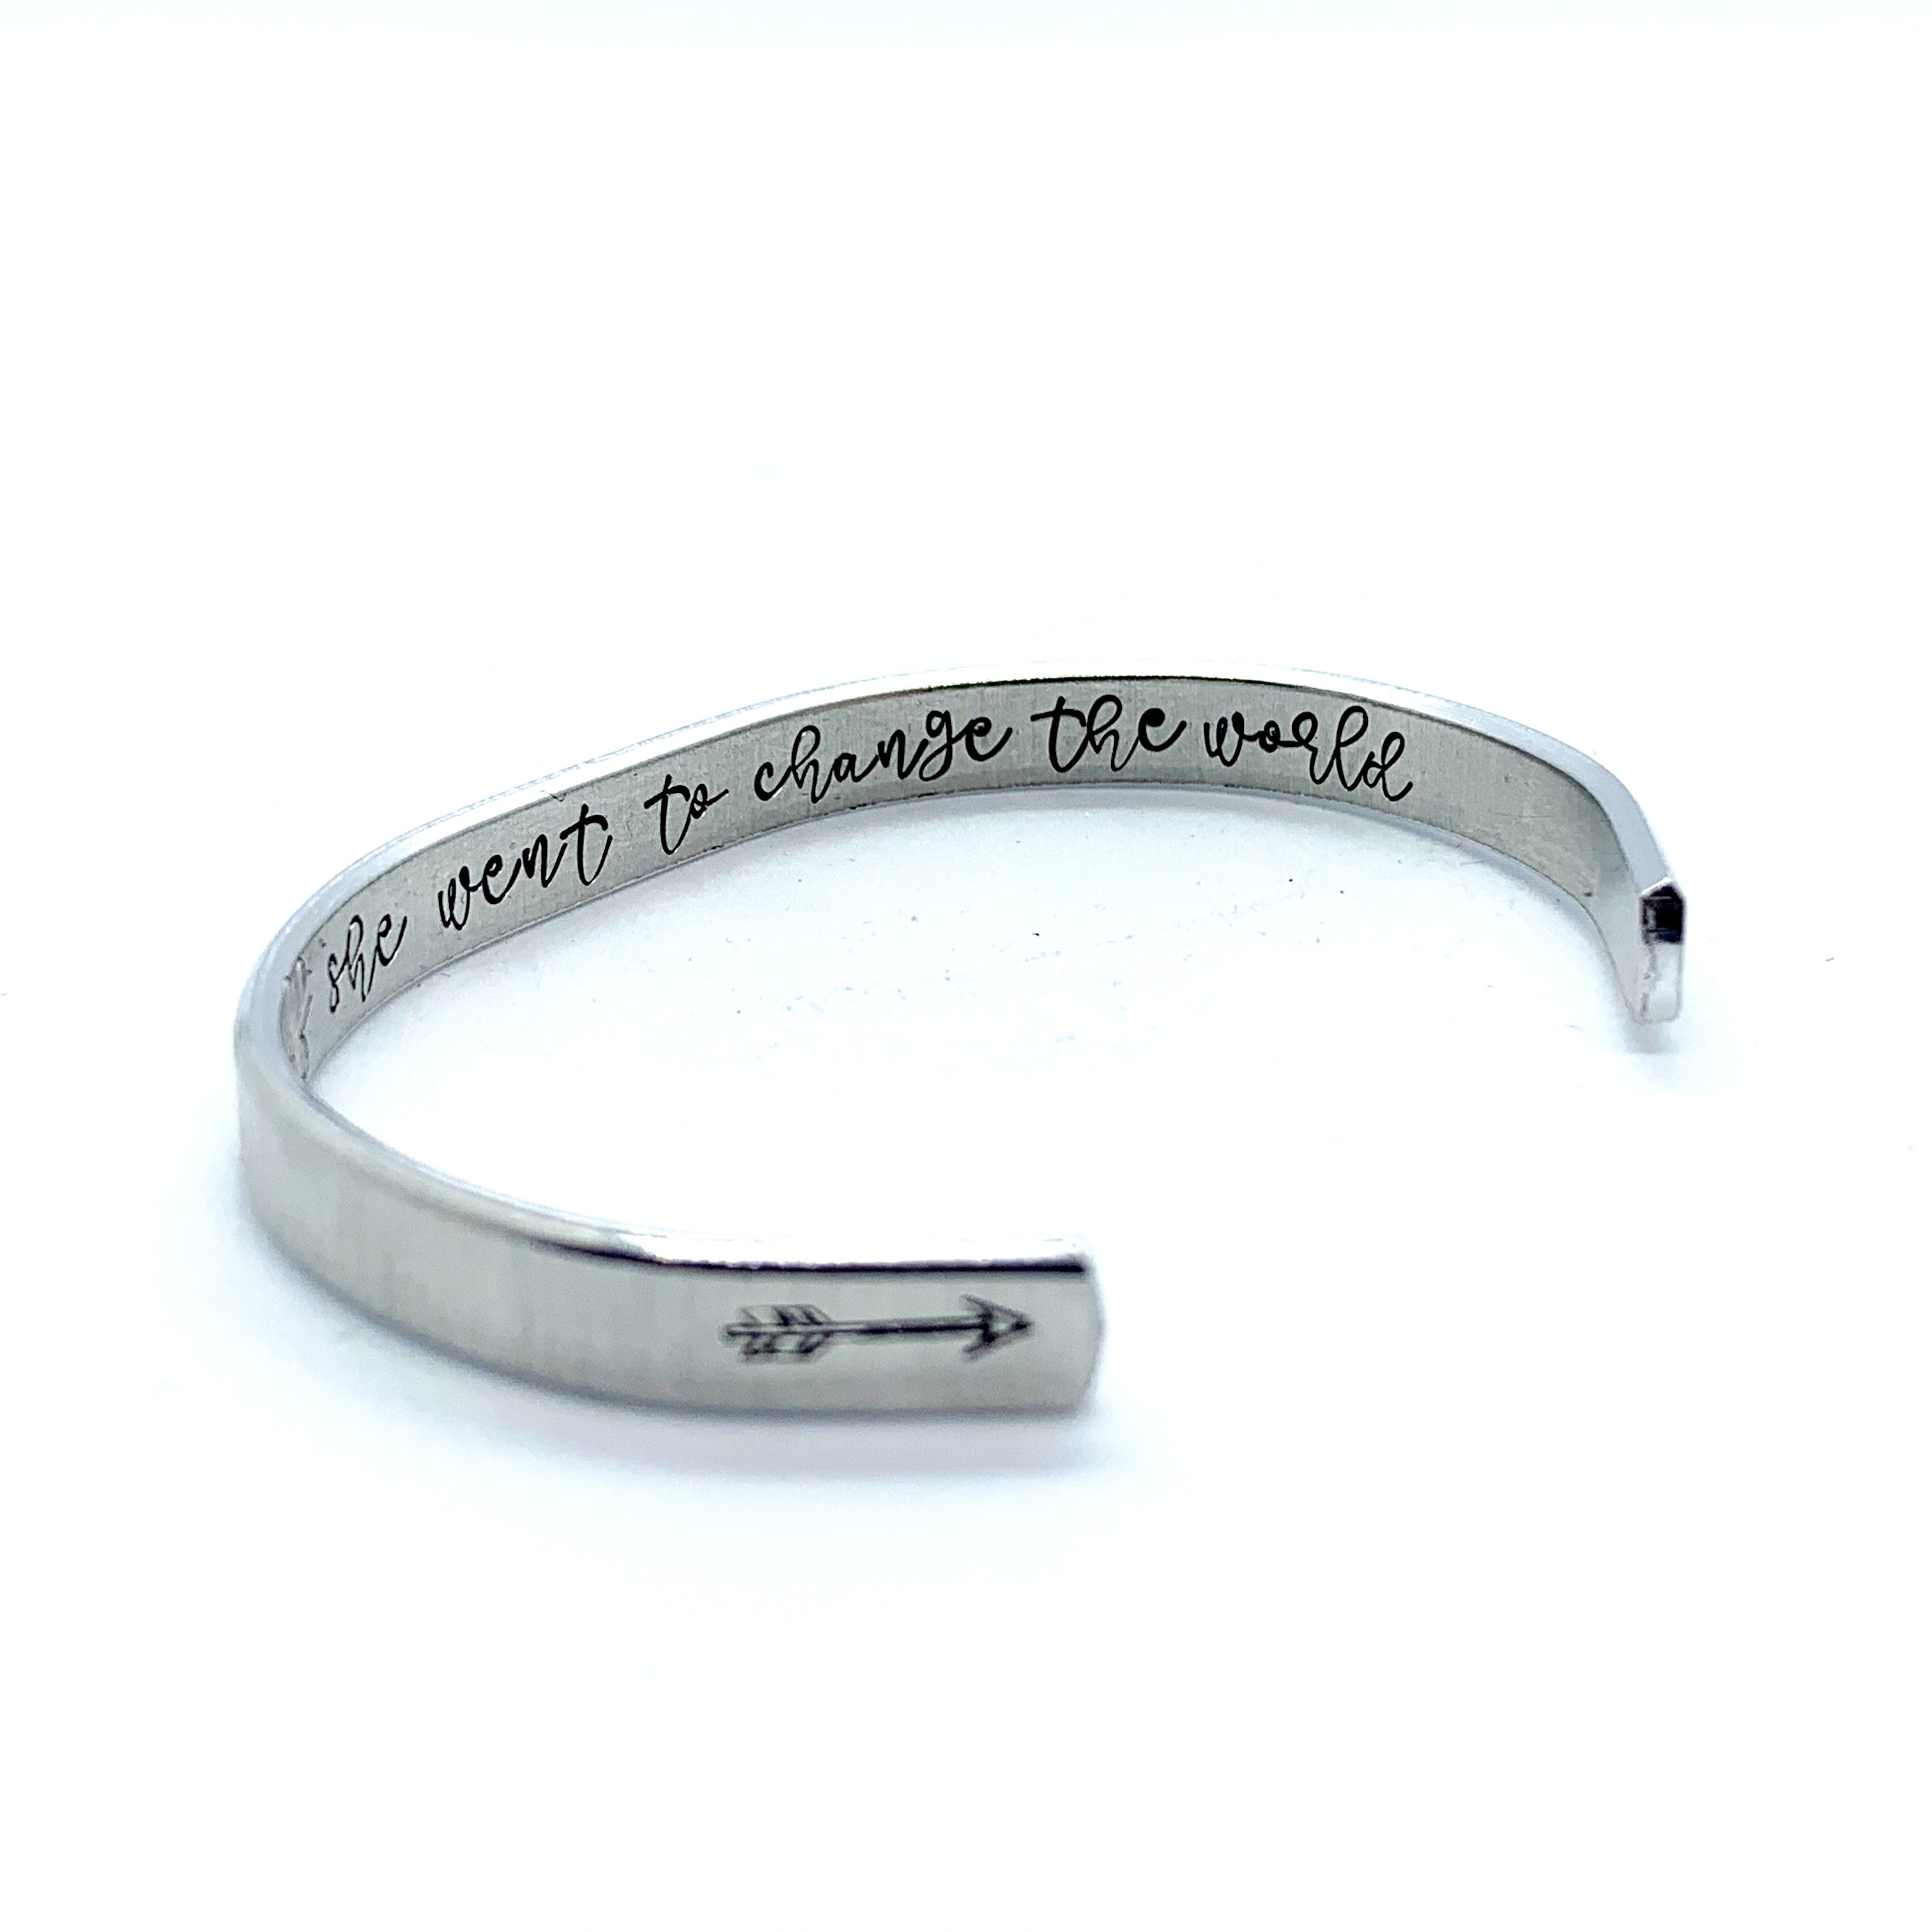 ¼ inch Aluminum Cuff -  (inside) And Off She Went To Change The World